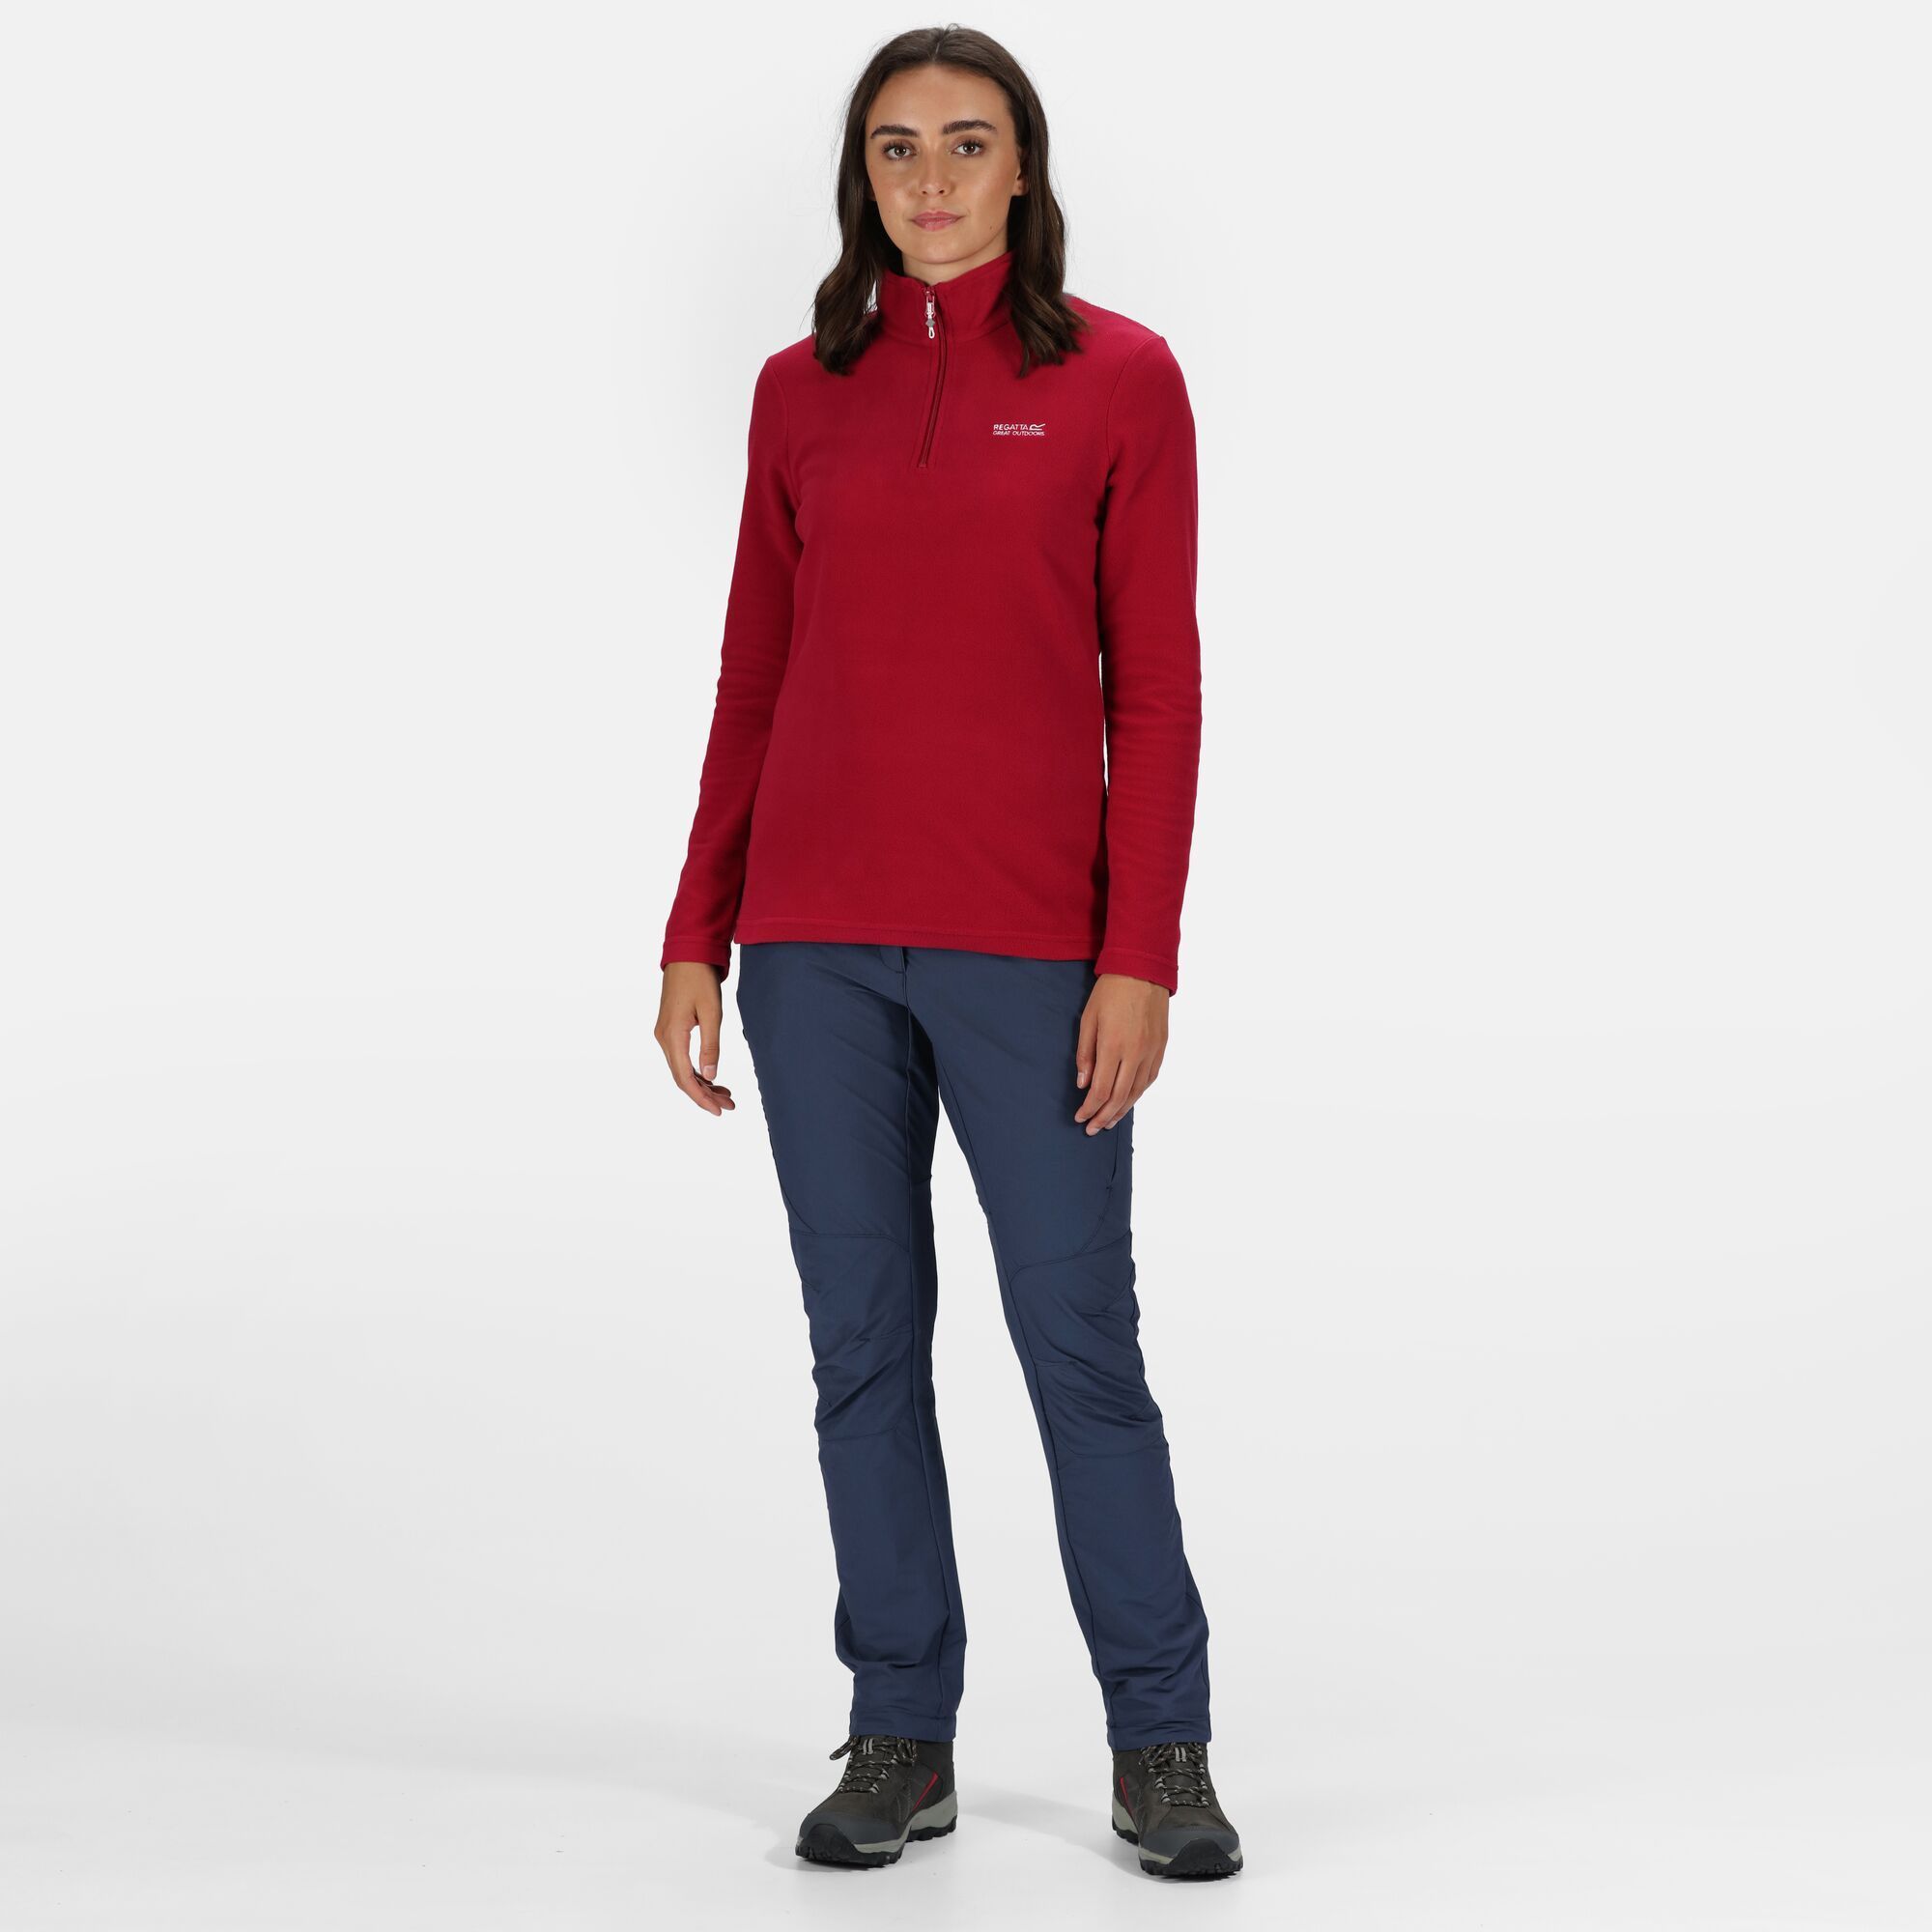 The womens Sweetheart Fleece is a best seller across the seasons. The classic 1/4 zip, loved for its great quality and value, is cut with a relaxed, everyday fit from lighter weight Symmetry fleece with an anti-pill finish. 100% Polyester. Regatta Womens sizing (bust approx): 6 (30in/76cm), 8 (32in/81cm), 10 (34in/86cm), 12 (36in/92cm), 14 (38in/97cm), 16 (40in/102cm), 18 (43in/109cm), 20 (45in/114cm), 22 (48in/122cm), 24 (50in/127cm), 26 (52in/132cm), 28 (54in/137cm), 30 (56in/142cm), 32 (58in/147cm), 34 (60in/152cm), 36 (62in/158cm).